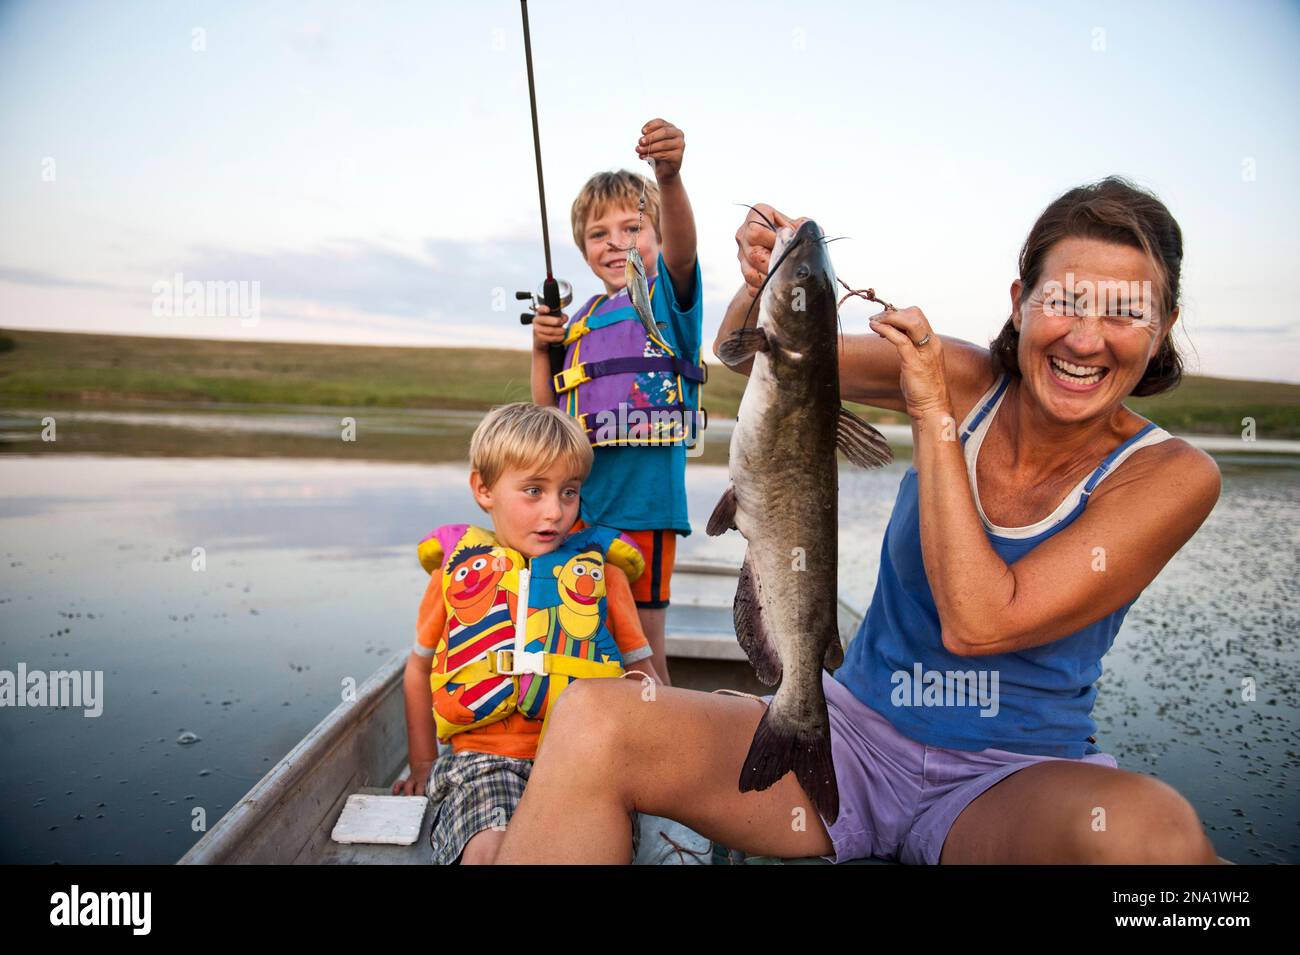 https://c8.alamy.com/comp/2NA1WH2/mother-and-two-young-sons-go-fishing-and-catch-fish-valparaiso-nebraska-united-states-of-america-2NA1WH2.jpg